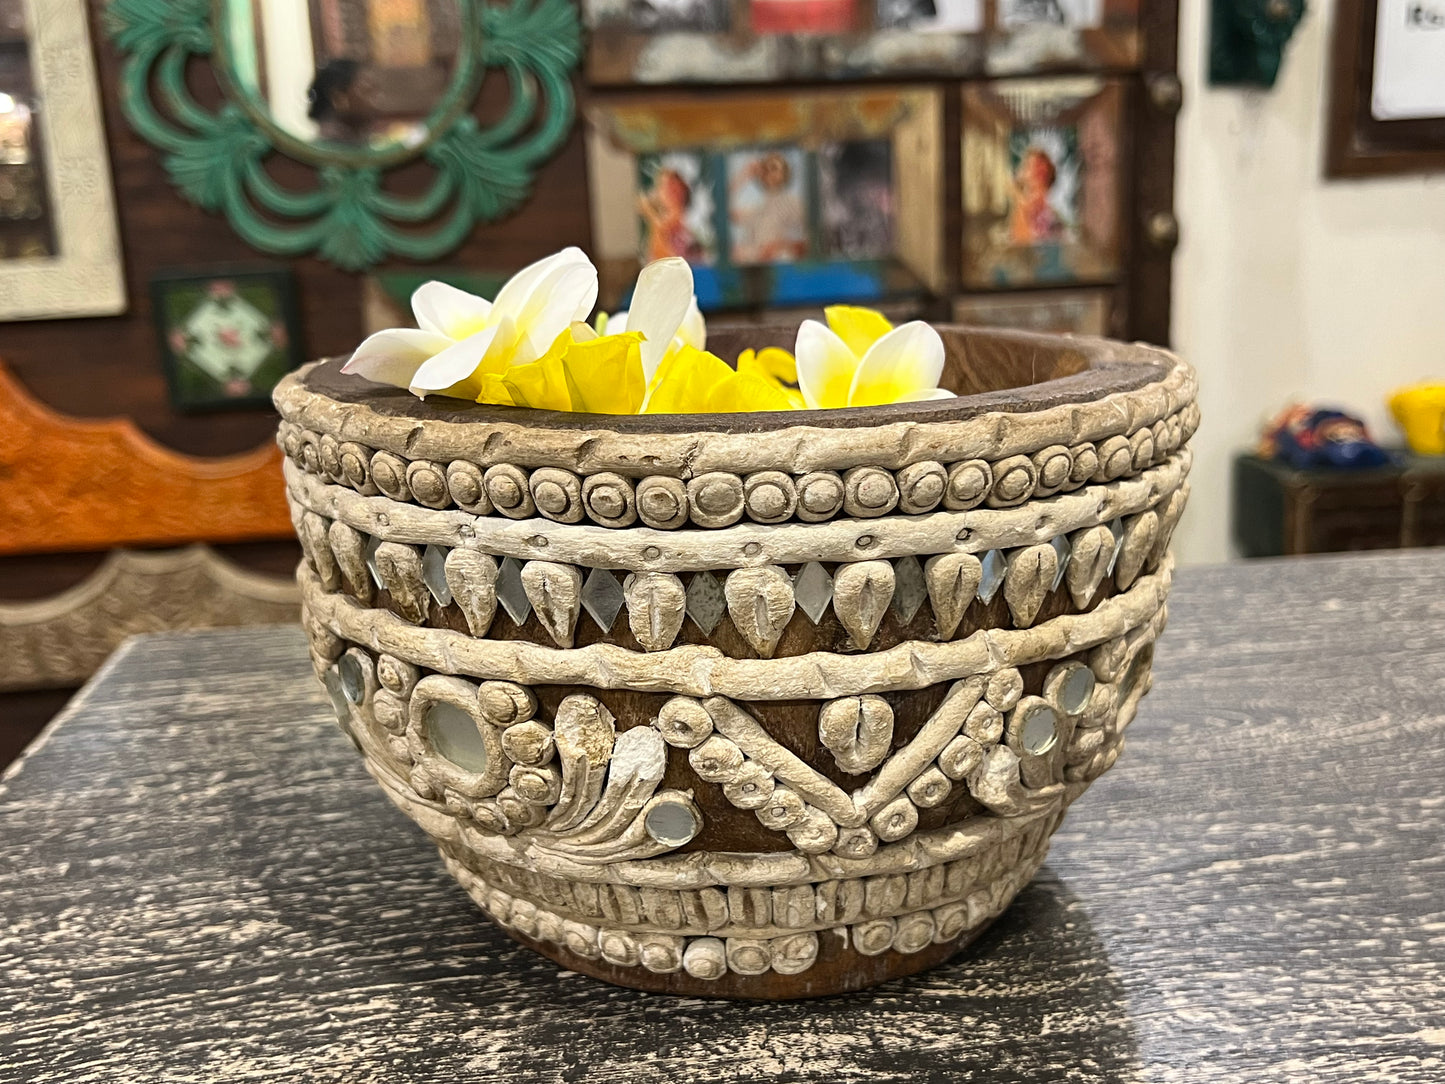 Image of Elegant and Traditional Wooden Bowl with Clay Work.  The Source India is an Indian Handicraft, Home Decor, Furnishing and Textiles Store. Based out of Hauz Khas Village New Delhi, each piece is carefully procured to allow the enhancement of India's Culture.